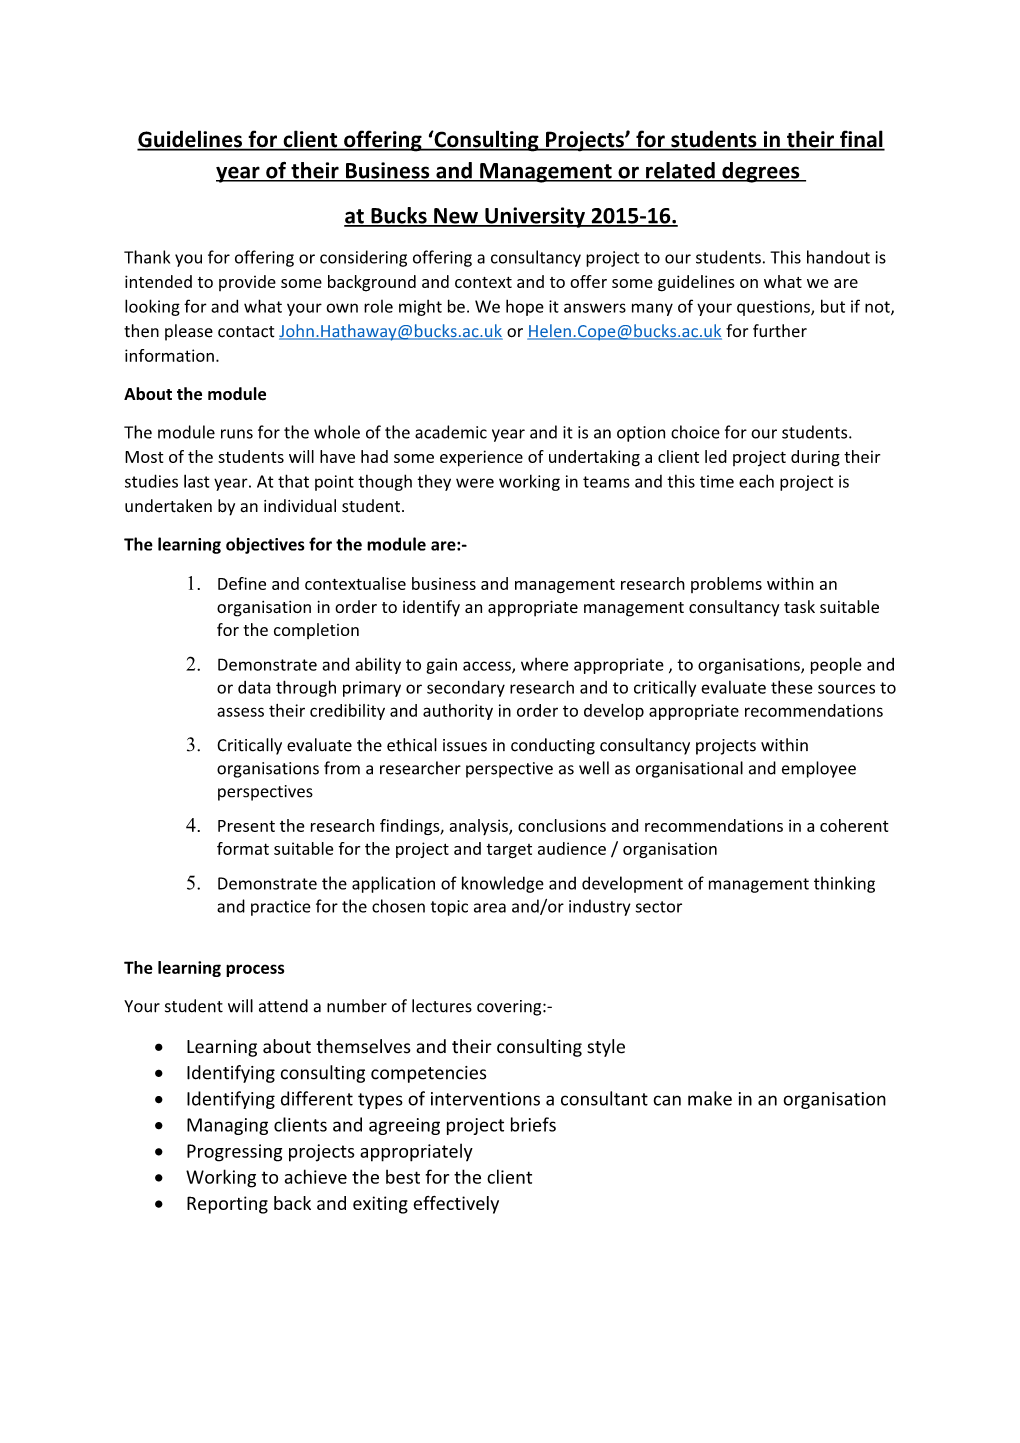 Guidelines for Client Offering Consulting Projects for Students in Their Final Year Of